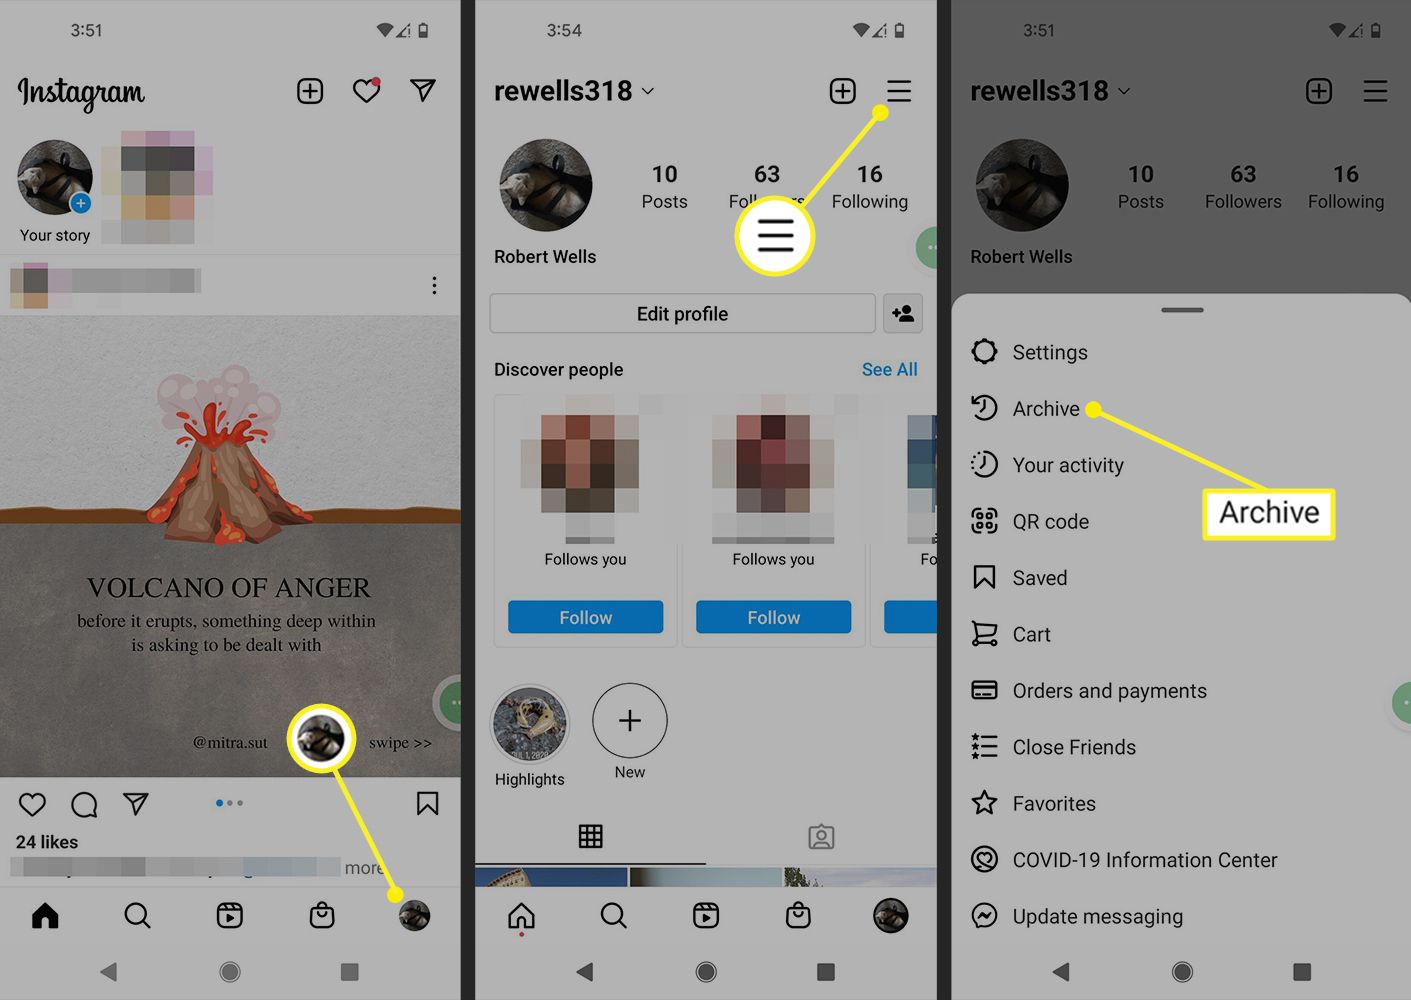 How To View Old Stories On Instagram